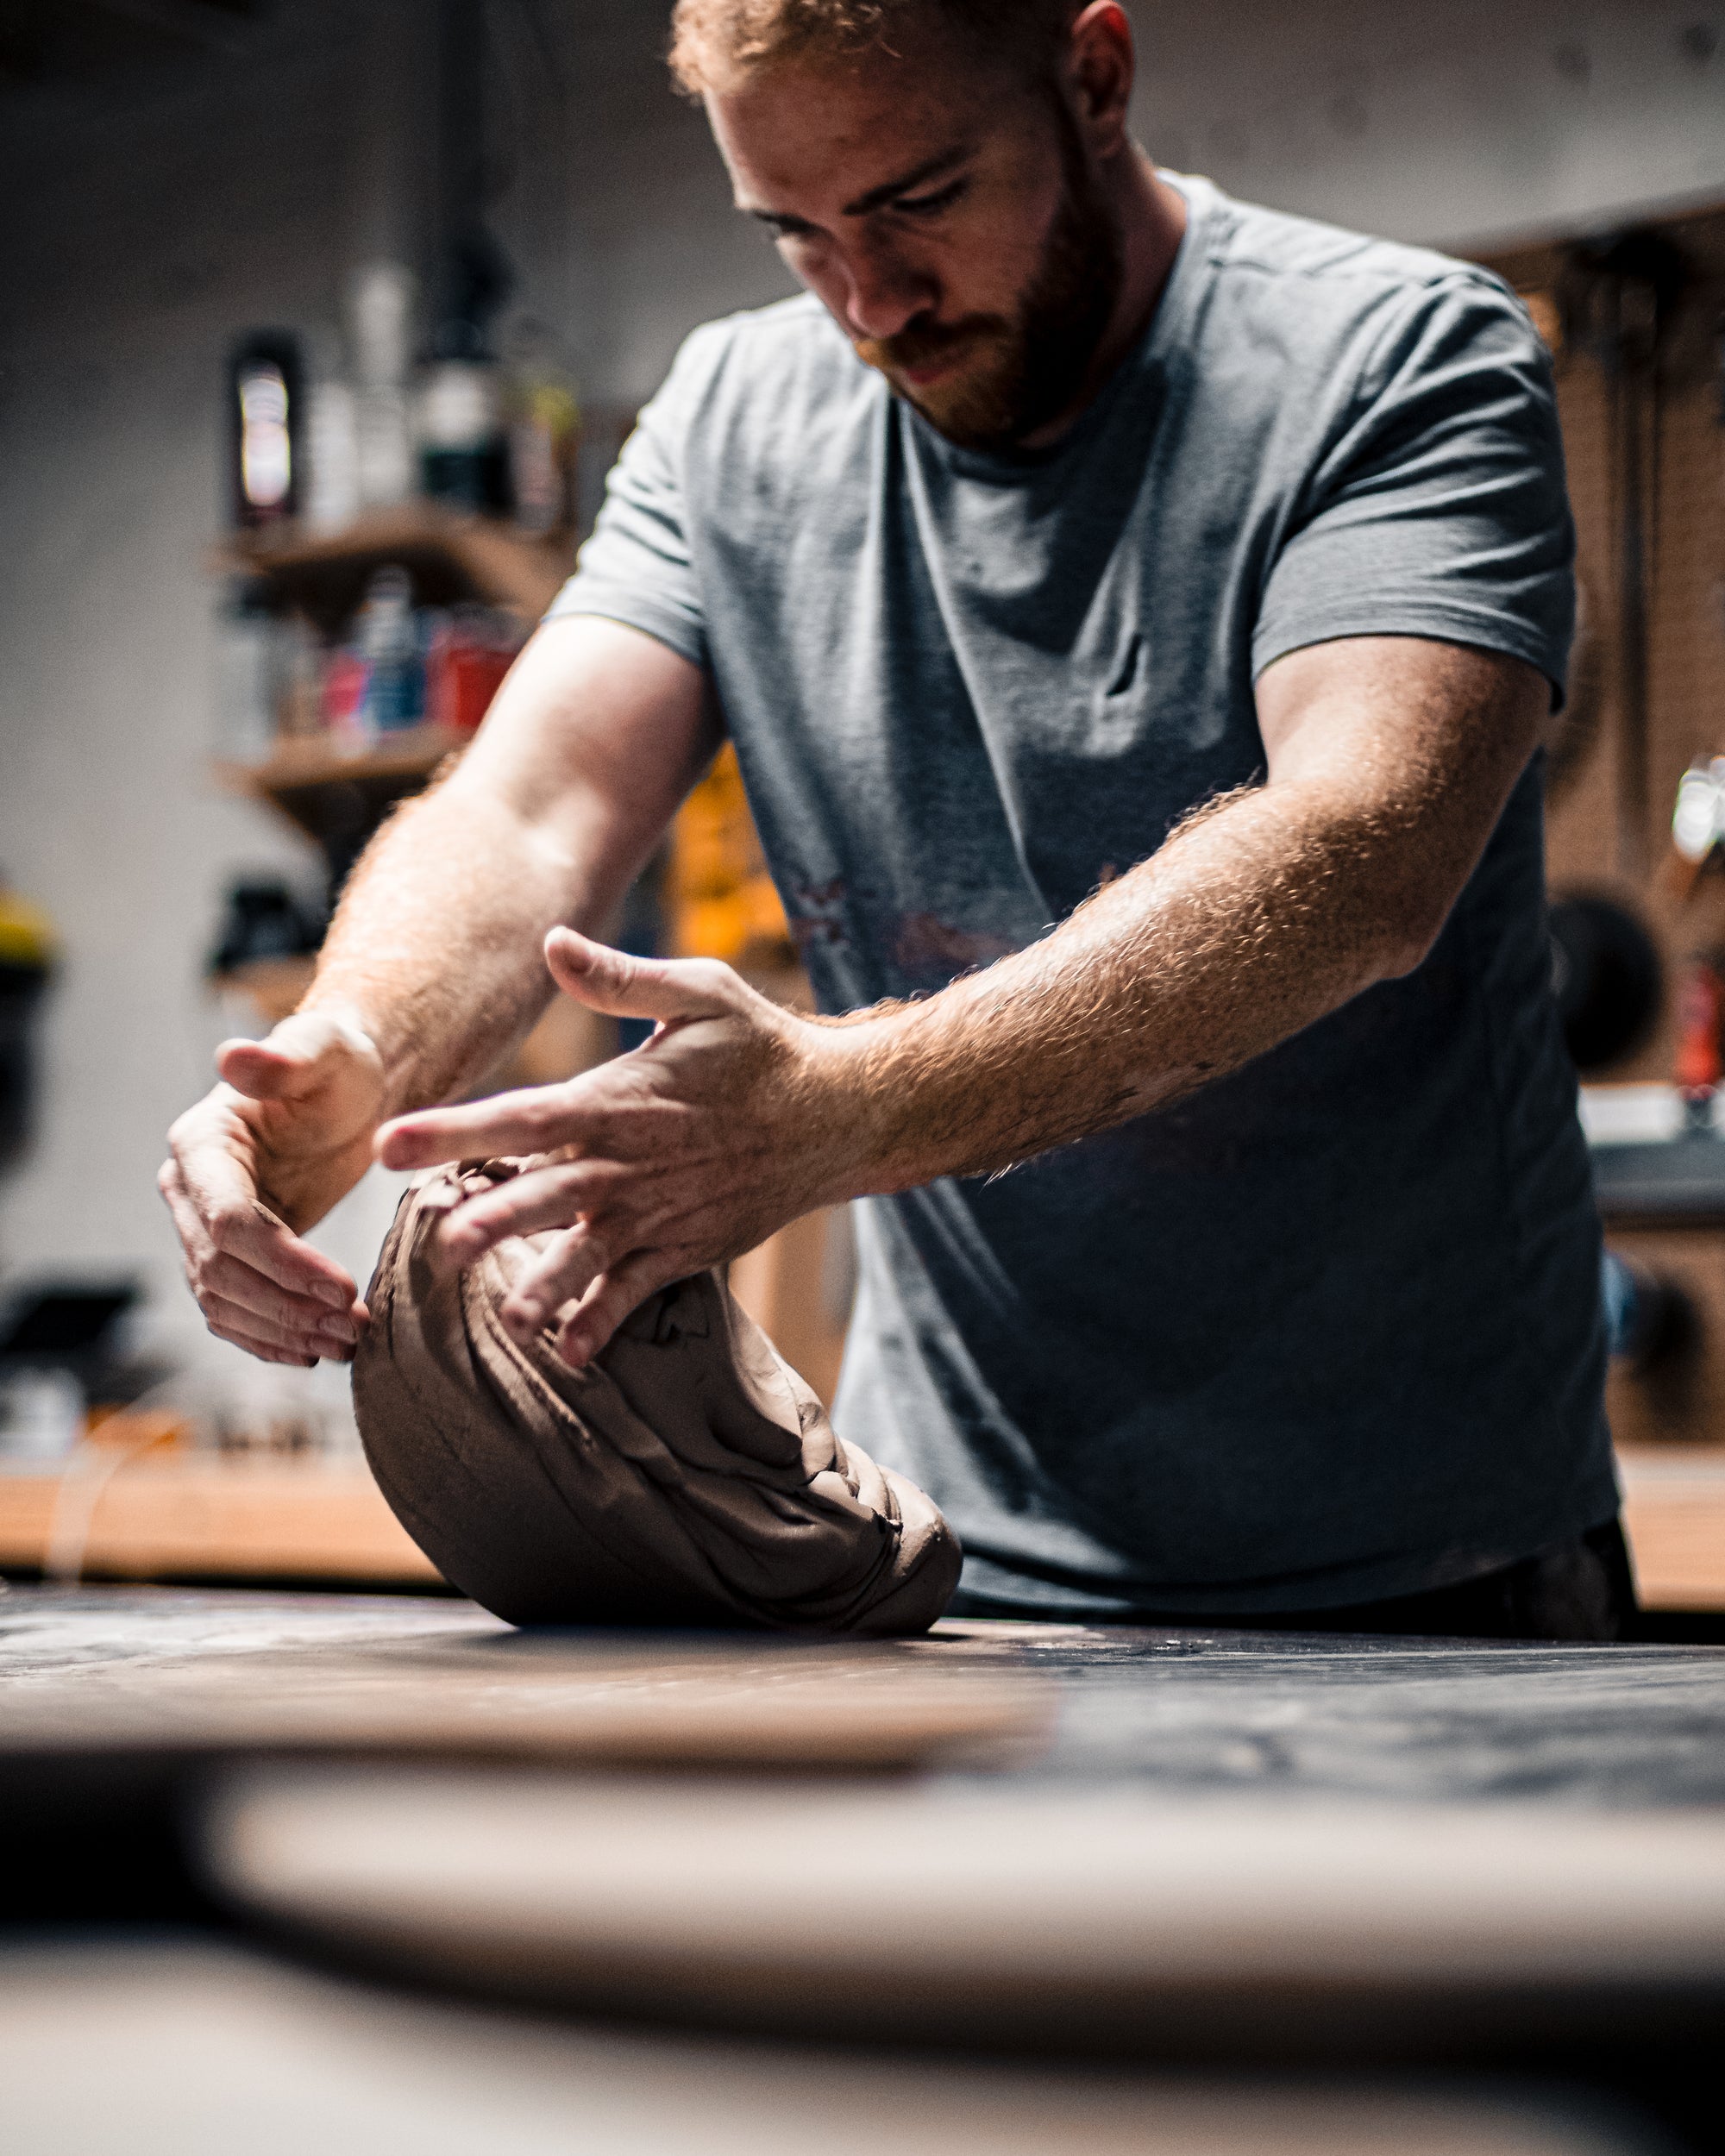 Connor McGinn Studios_For the Restaurant and the Home_Artist and Artisan_Handcrafted Ceramics_Non-Toxic Materials_Master Craftsman_Clay_Kiln_New York 